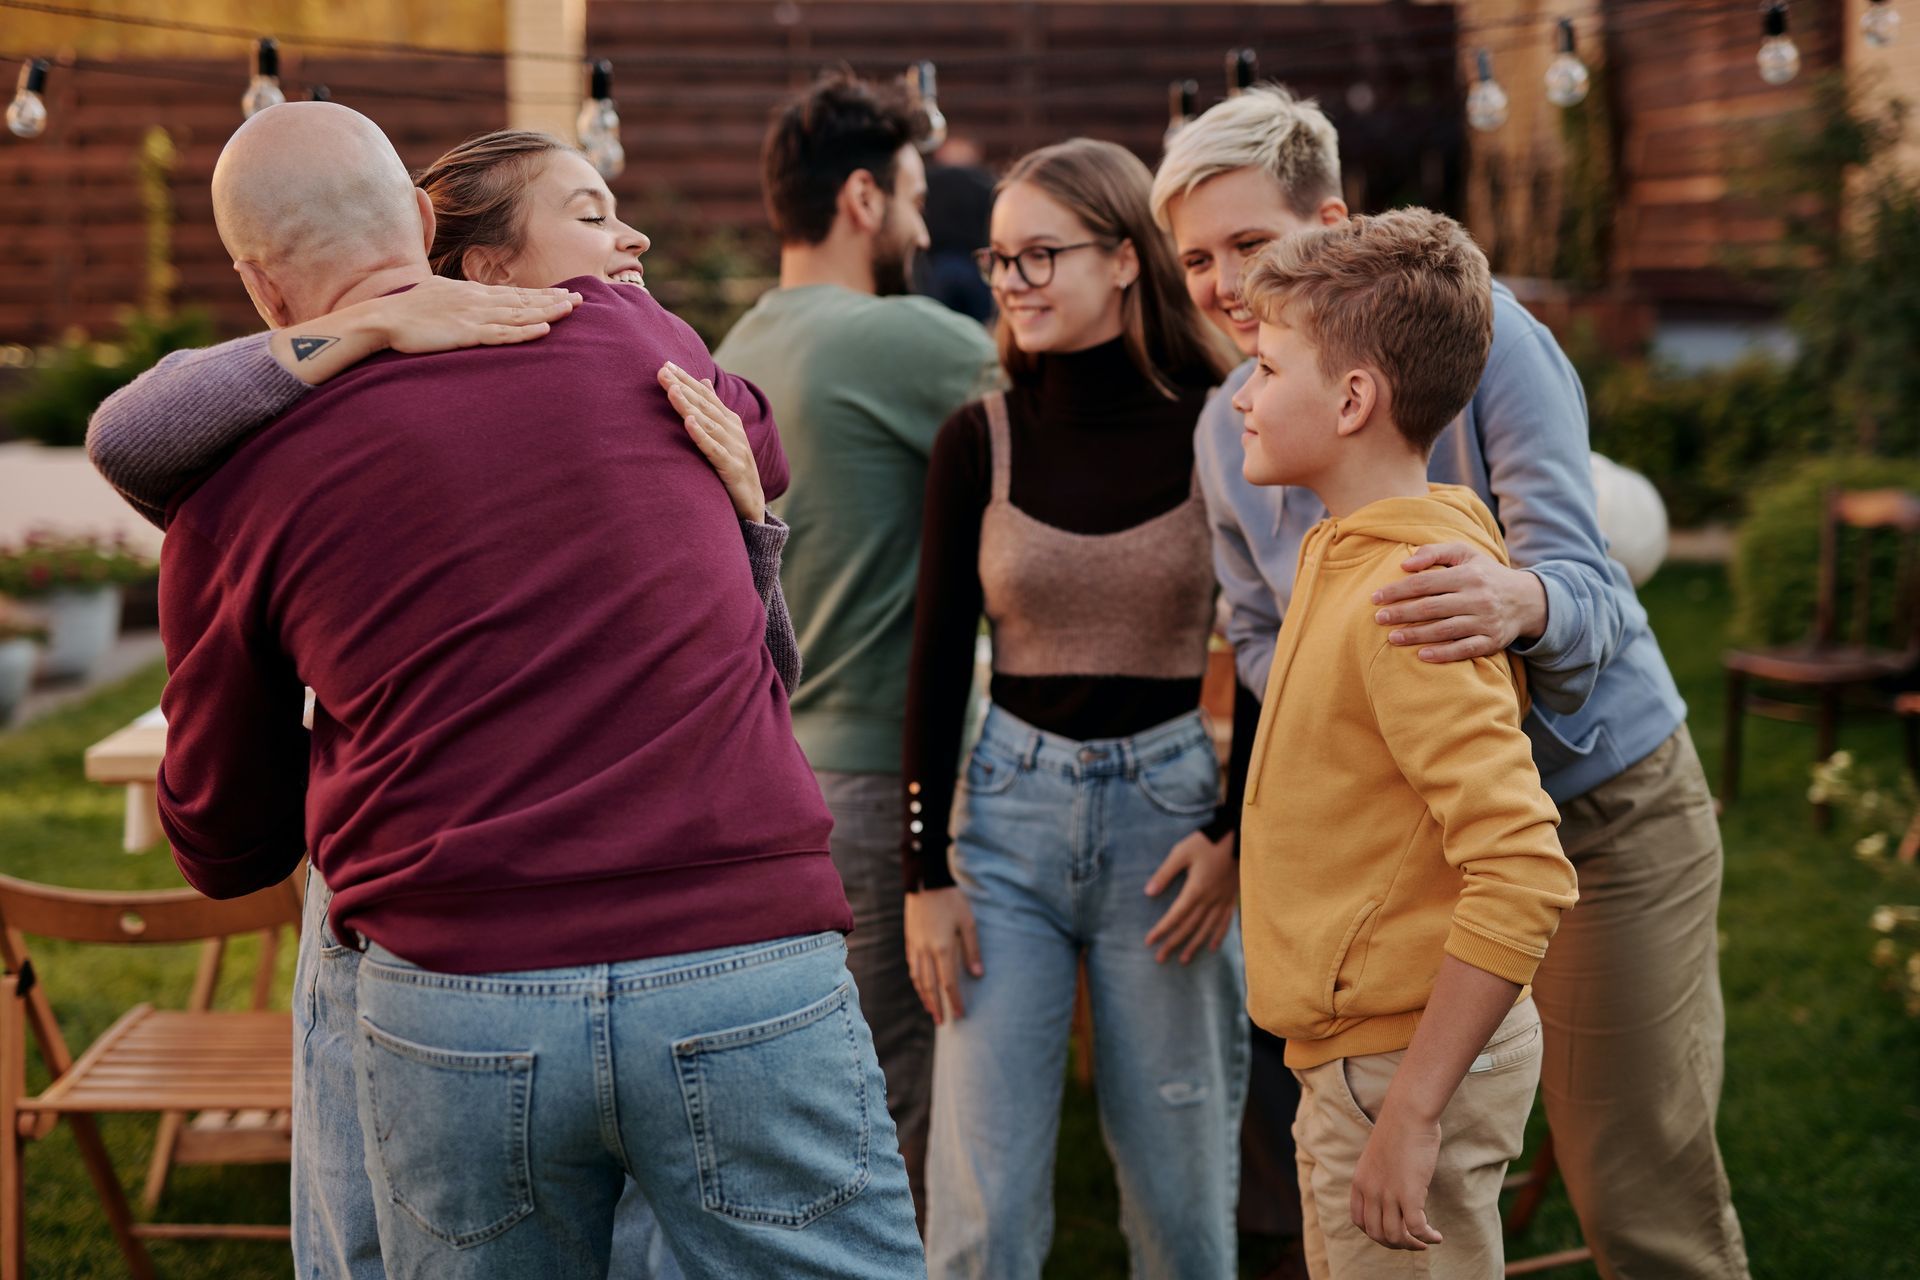 a group of people are hugging each other in a backyard